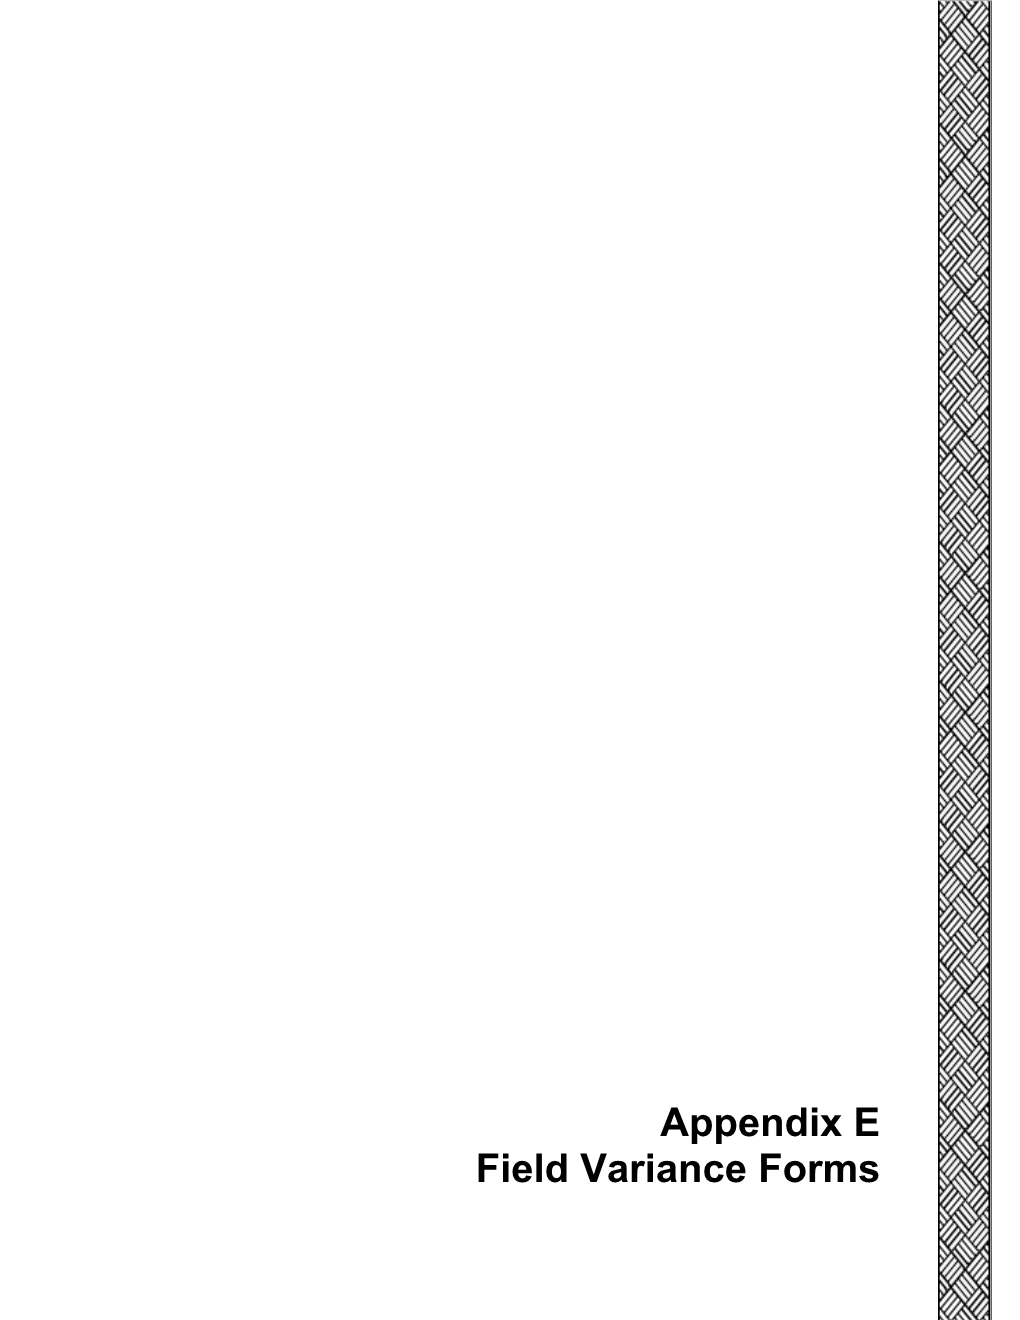 Appendix E Field Variance Forms